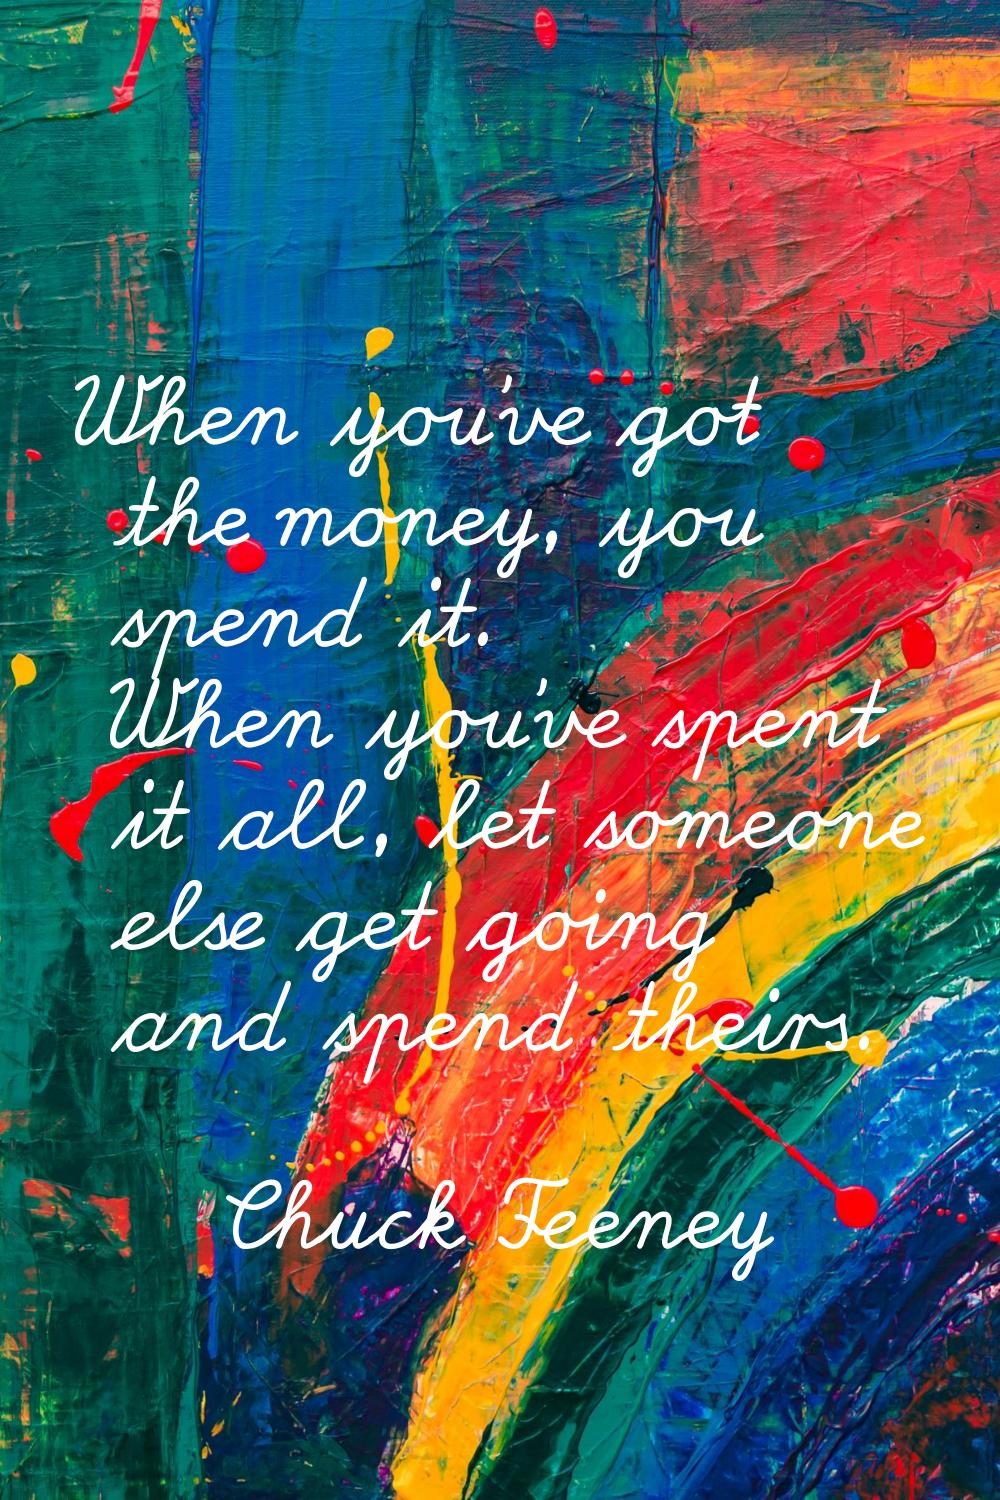 When you've got the money, you spend it. When you've spent it all, let someone else get going and s